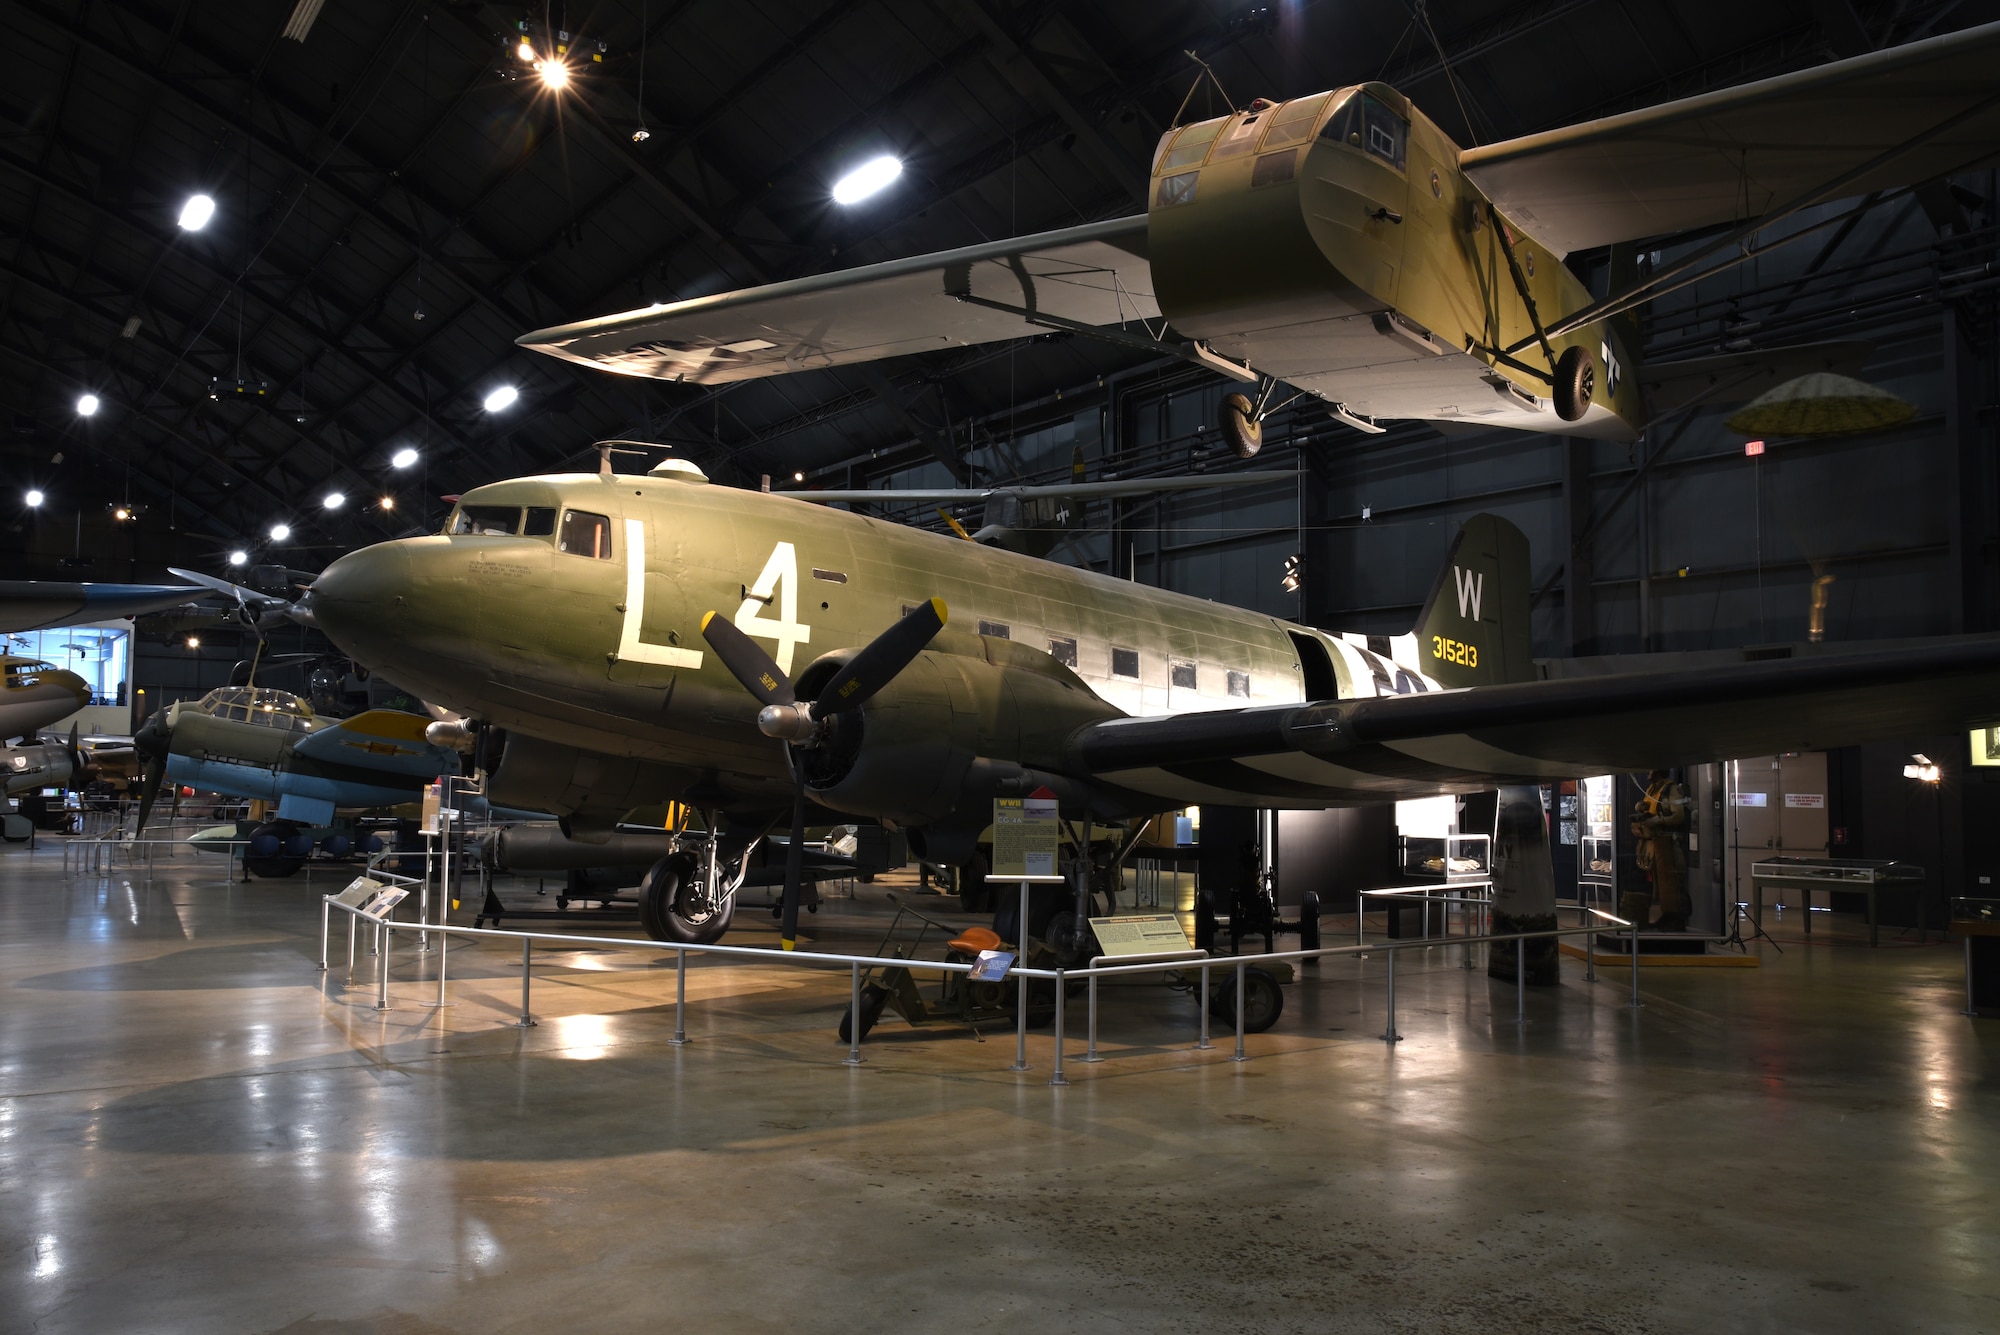 The Douglas C-47 and Waco CG-4A glider took part in D-Day. Both aircraft can be found in the WWII Gallery.